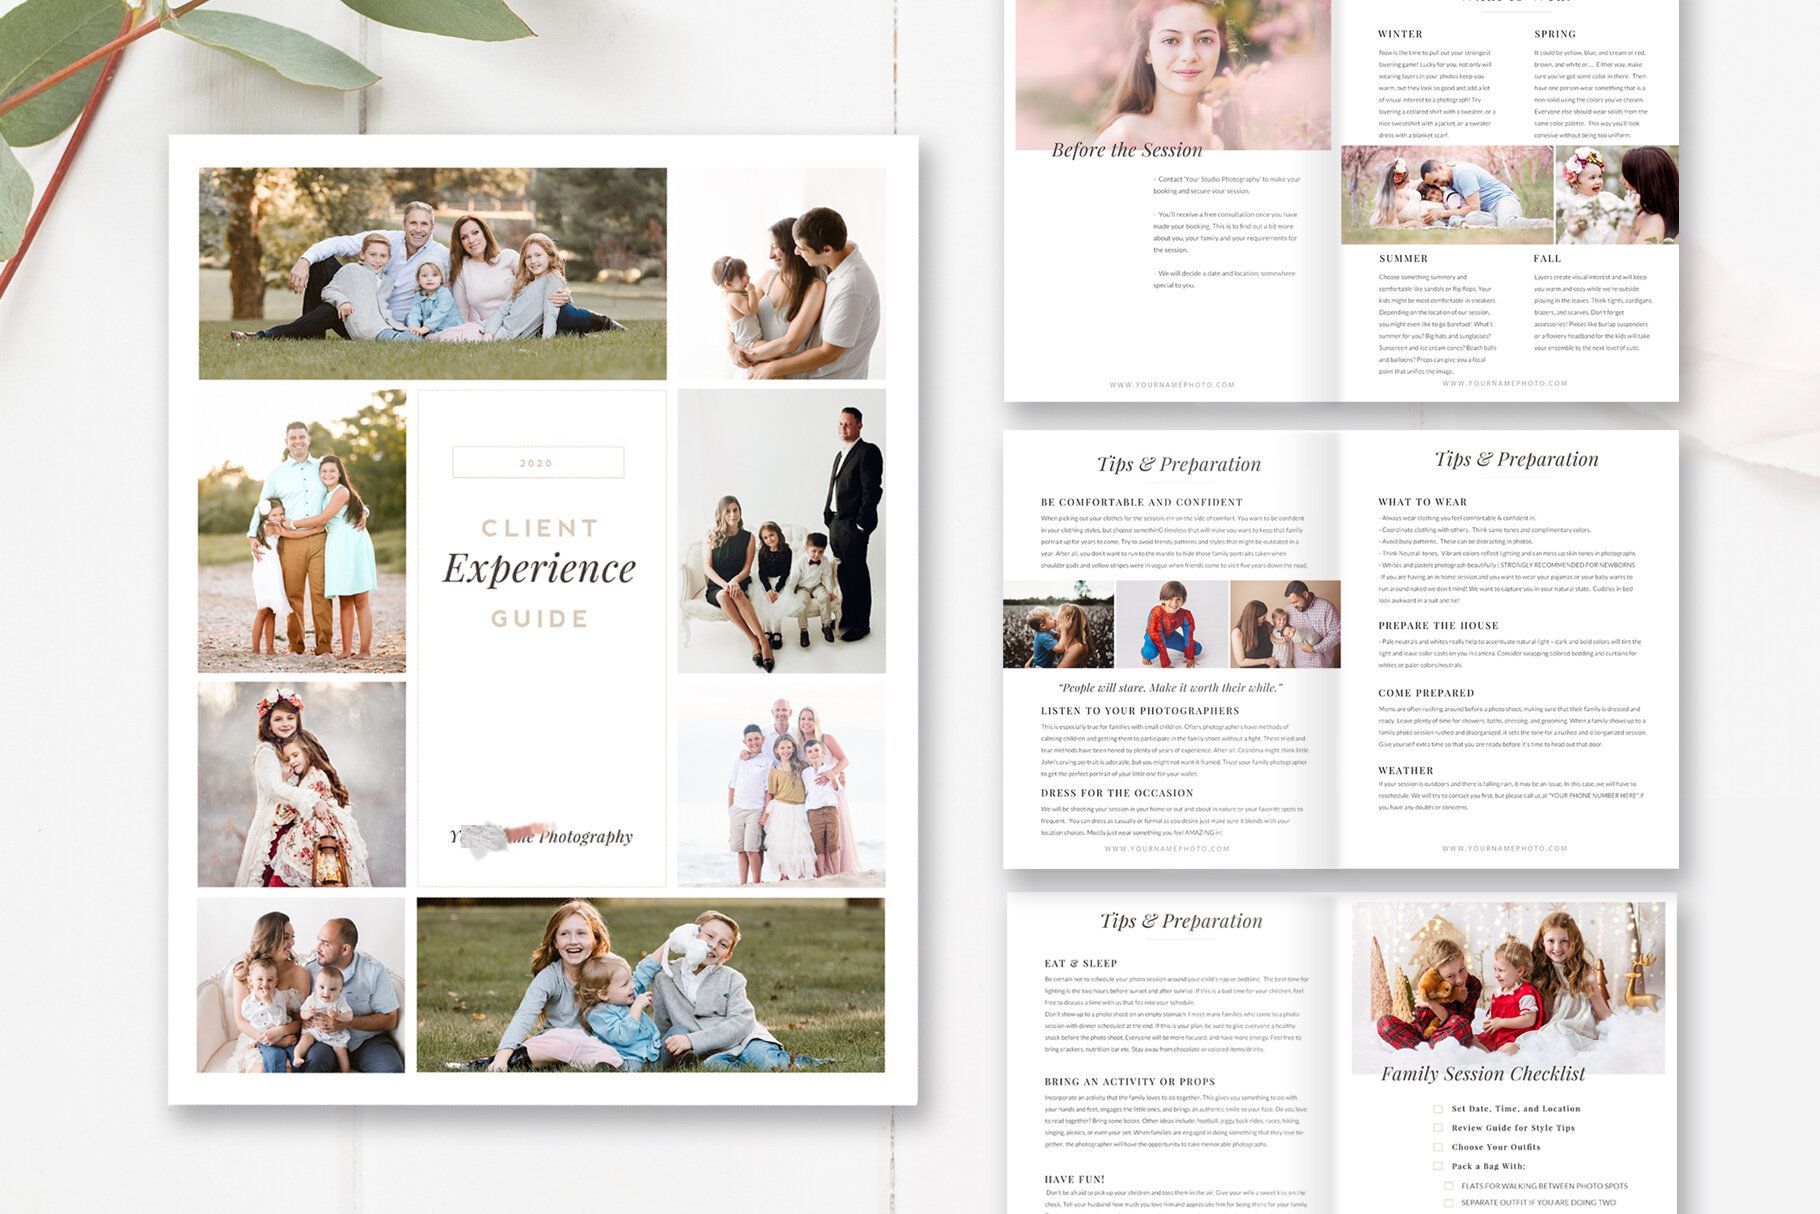 Client Experience Guide Template for Photographers — By Stephanie Design - Client Experience Guide Template for Photographers — By Stephanie Design -   14 magazine style Guides ideas